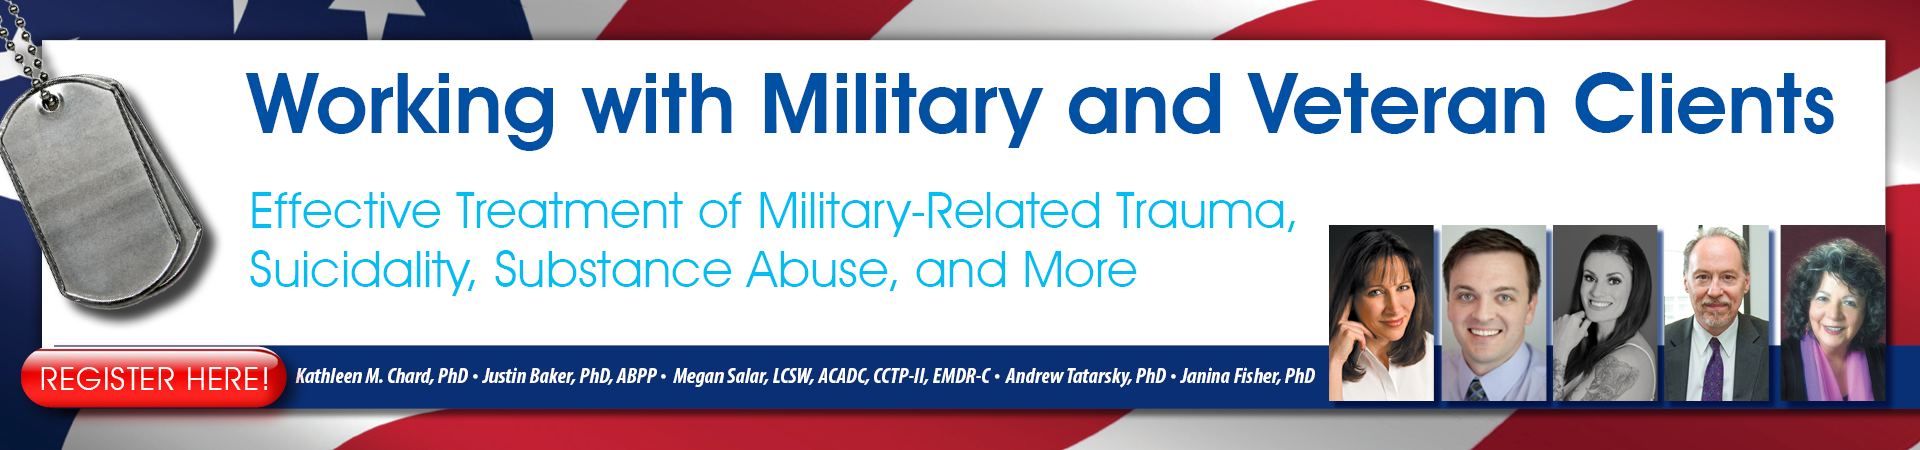 Working with Military and Veteran Clients: Effective Treatment of Military-Related Trauma, Suicidality, Substance Abuse, and More